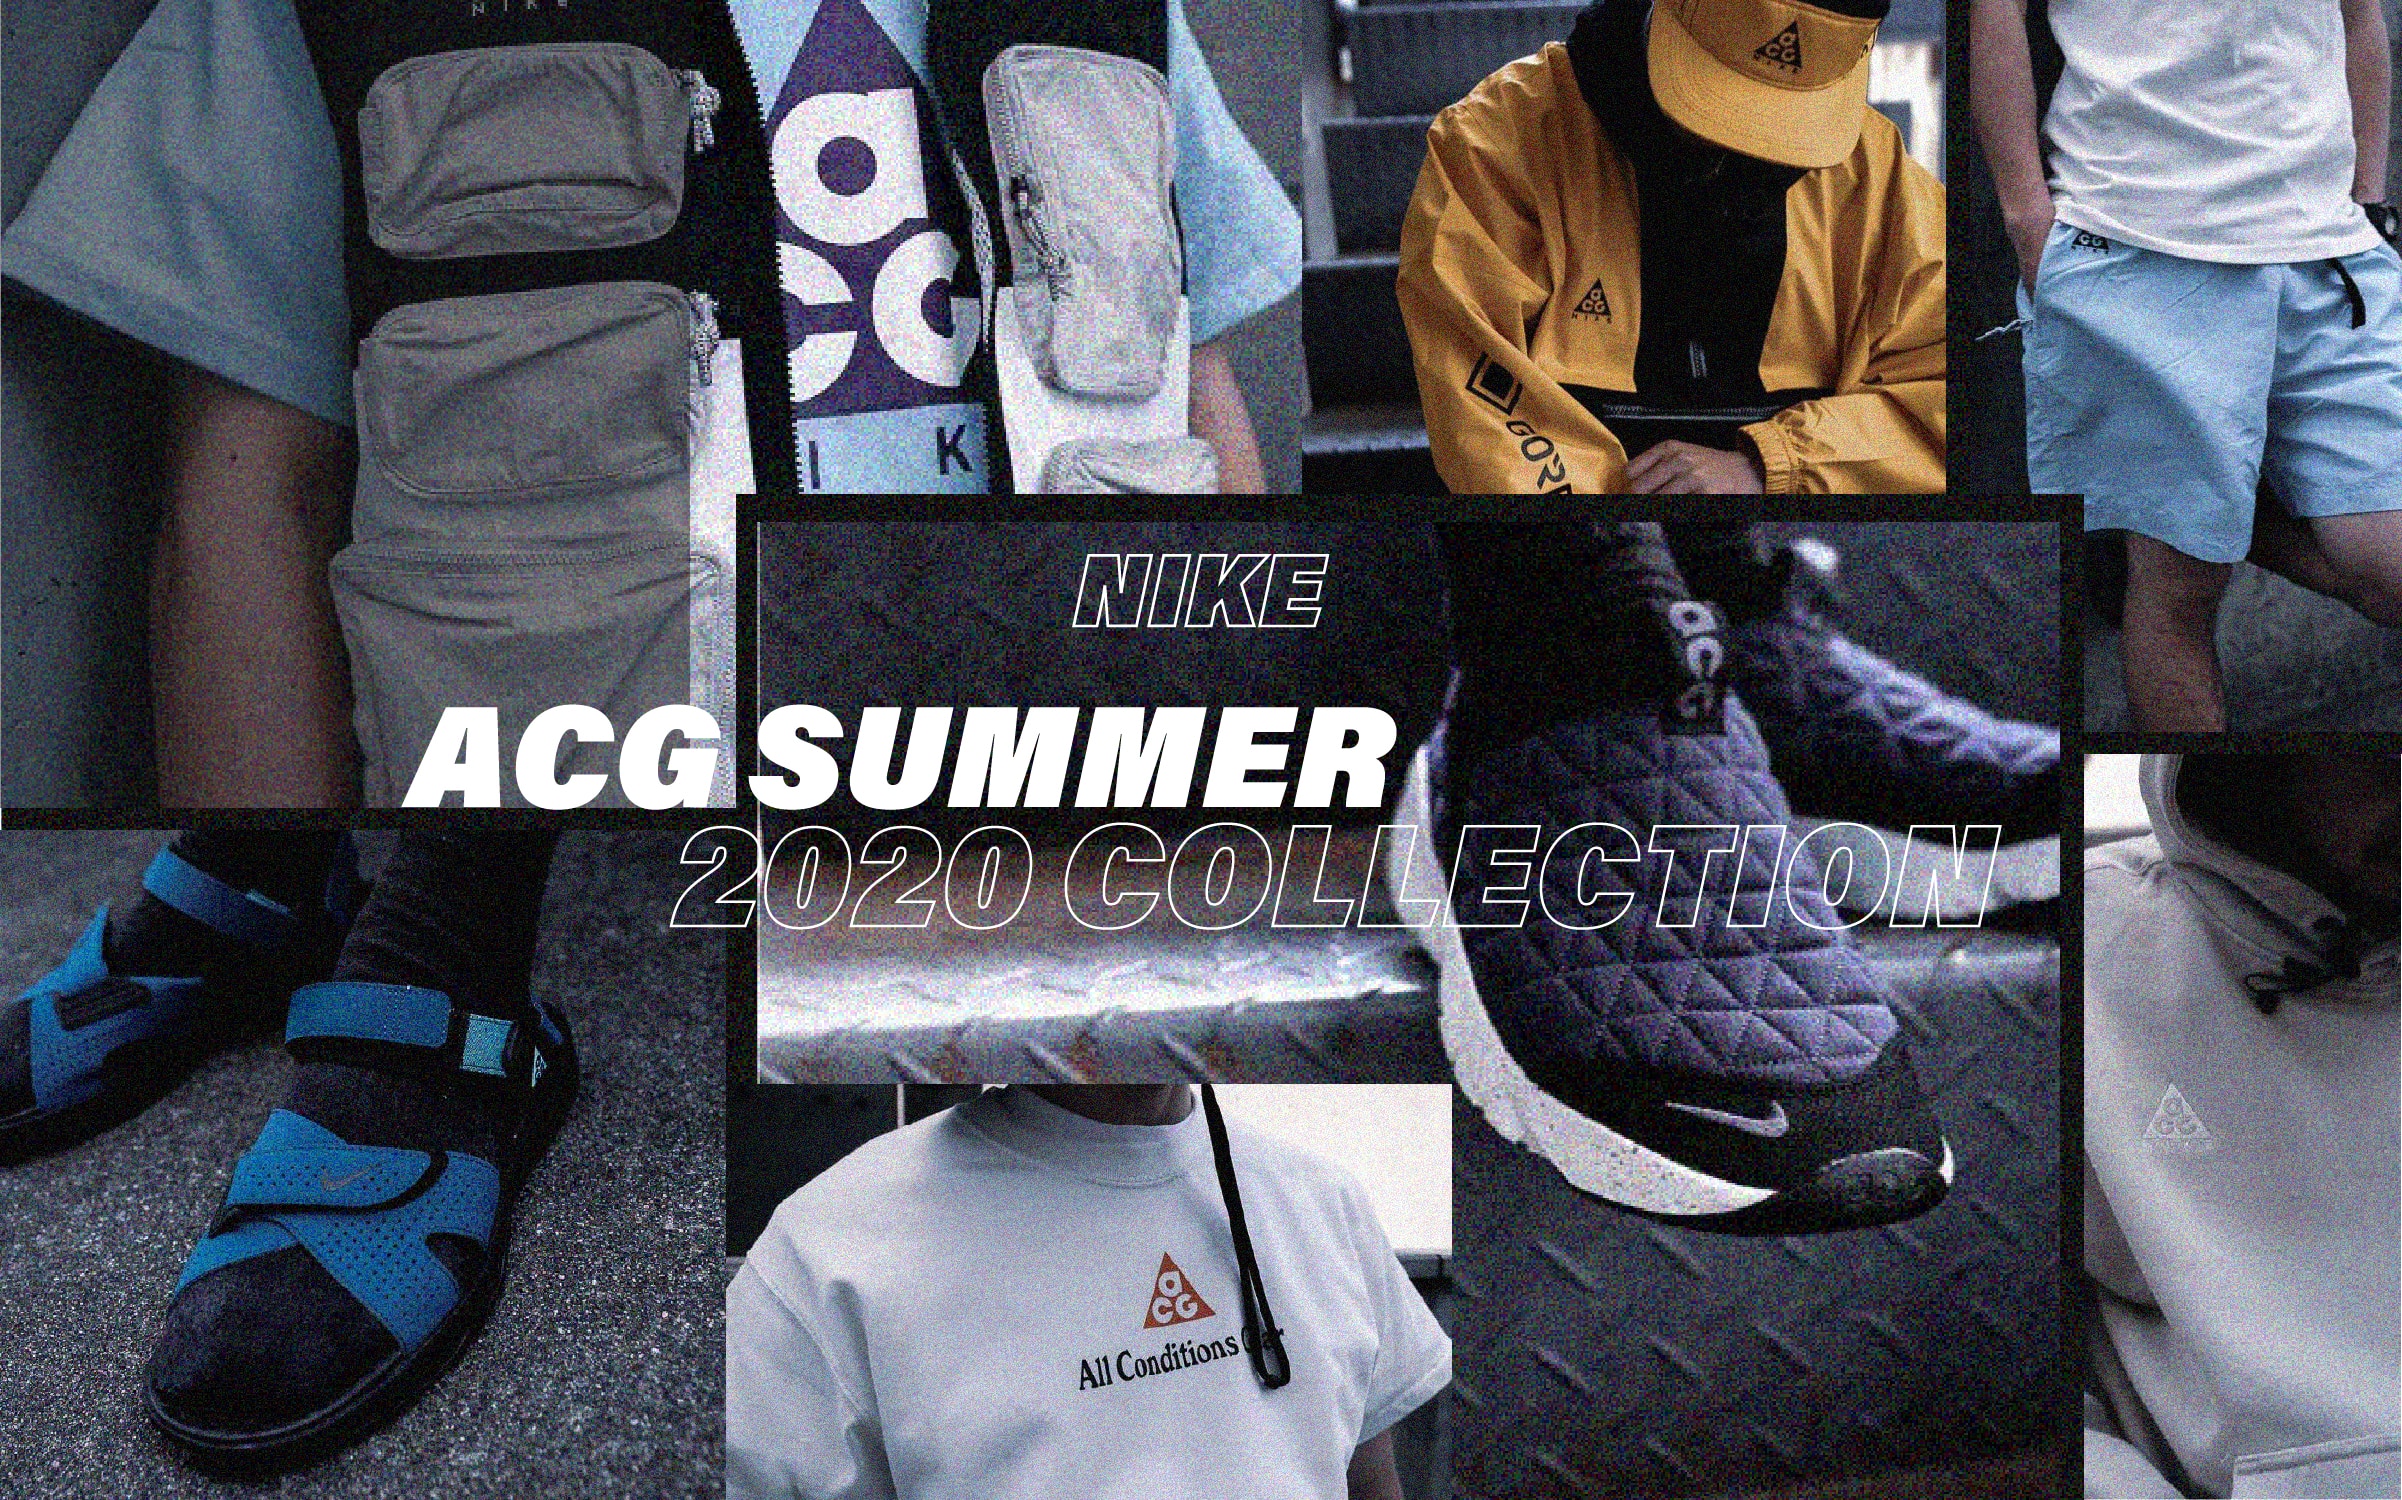 NIKE ACG SUMMER 2020 COLLECTION